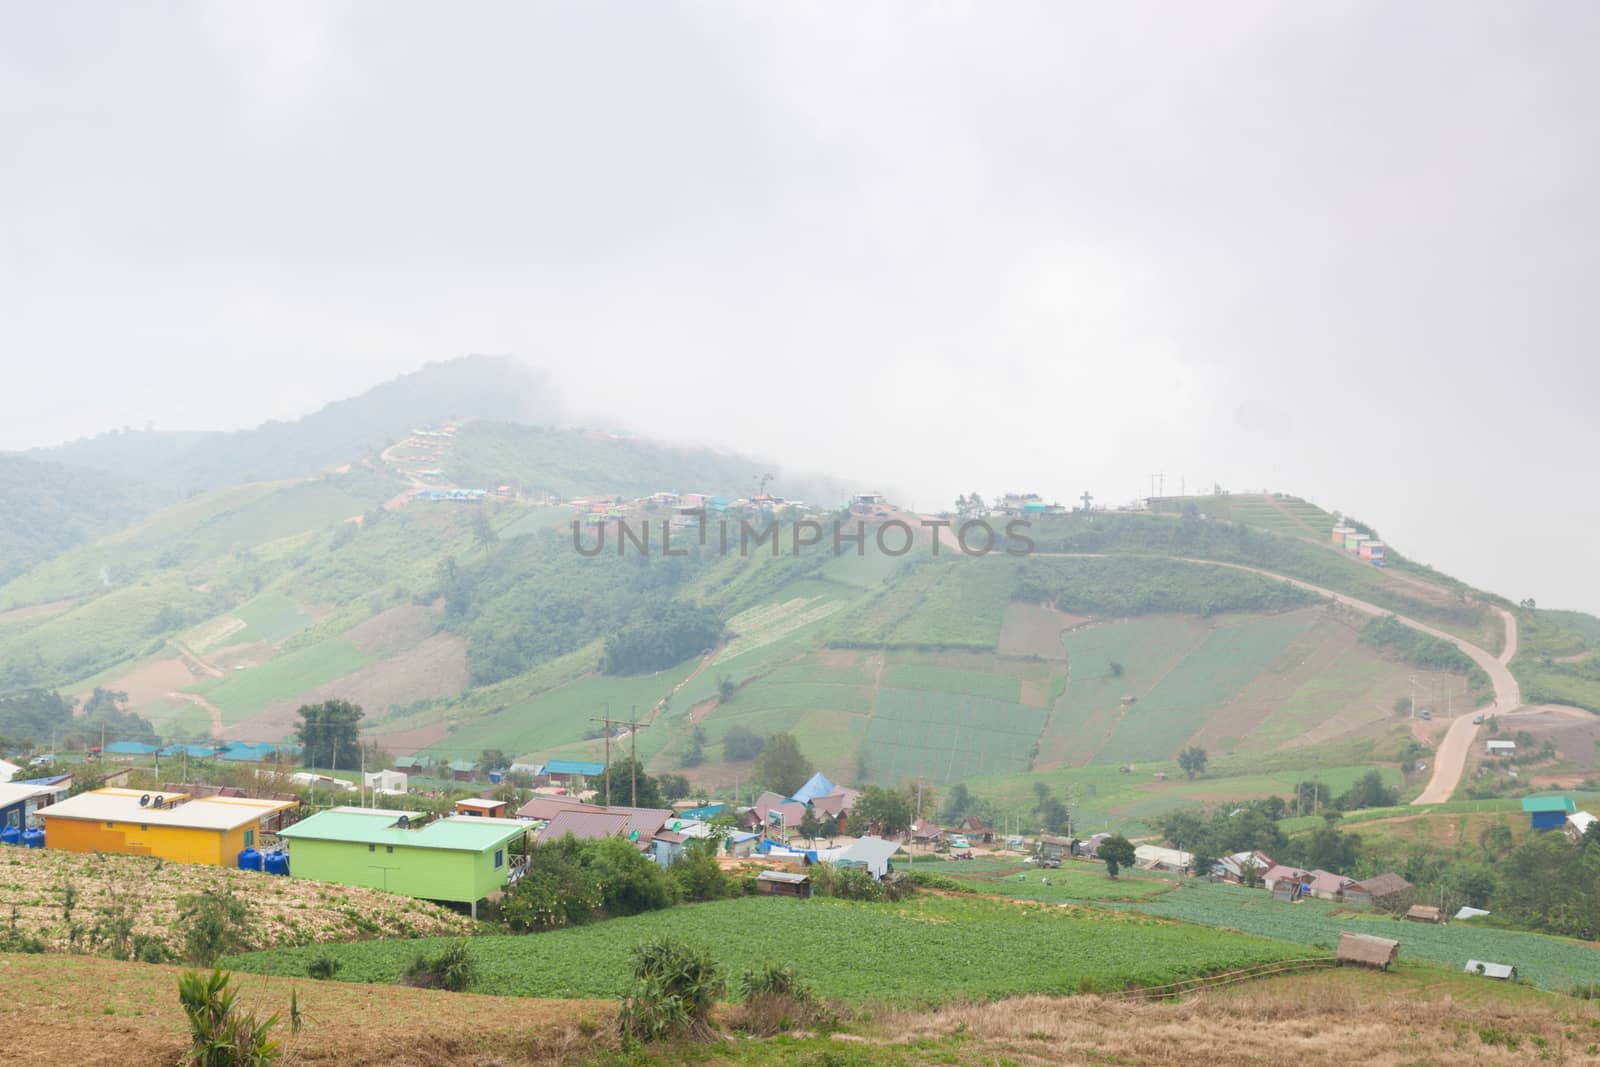 Villages and farmland in the mountains. Agricultural areas of the house on the hill.